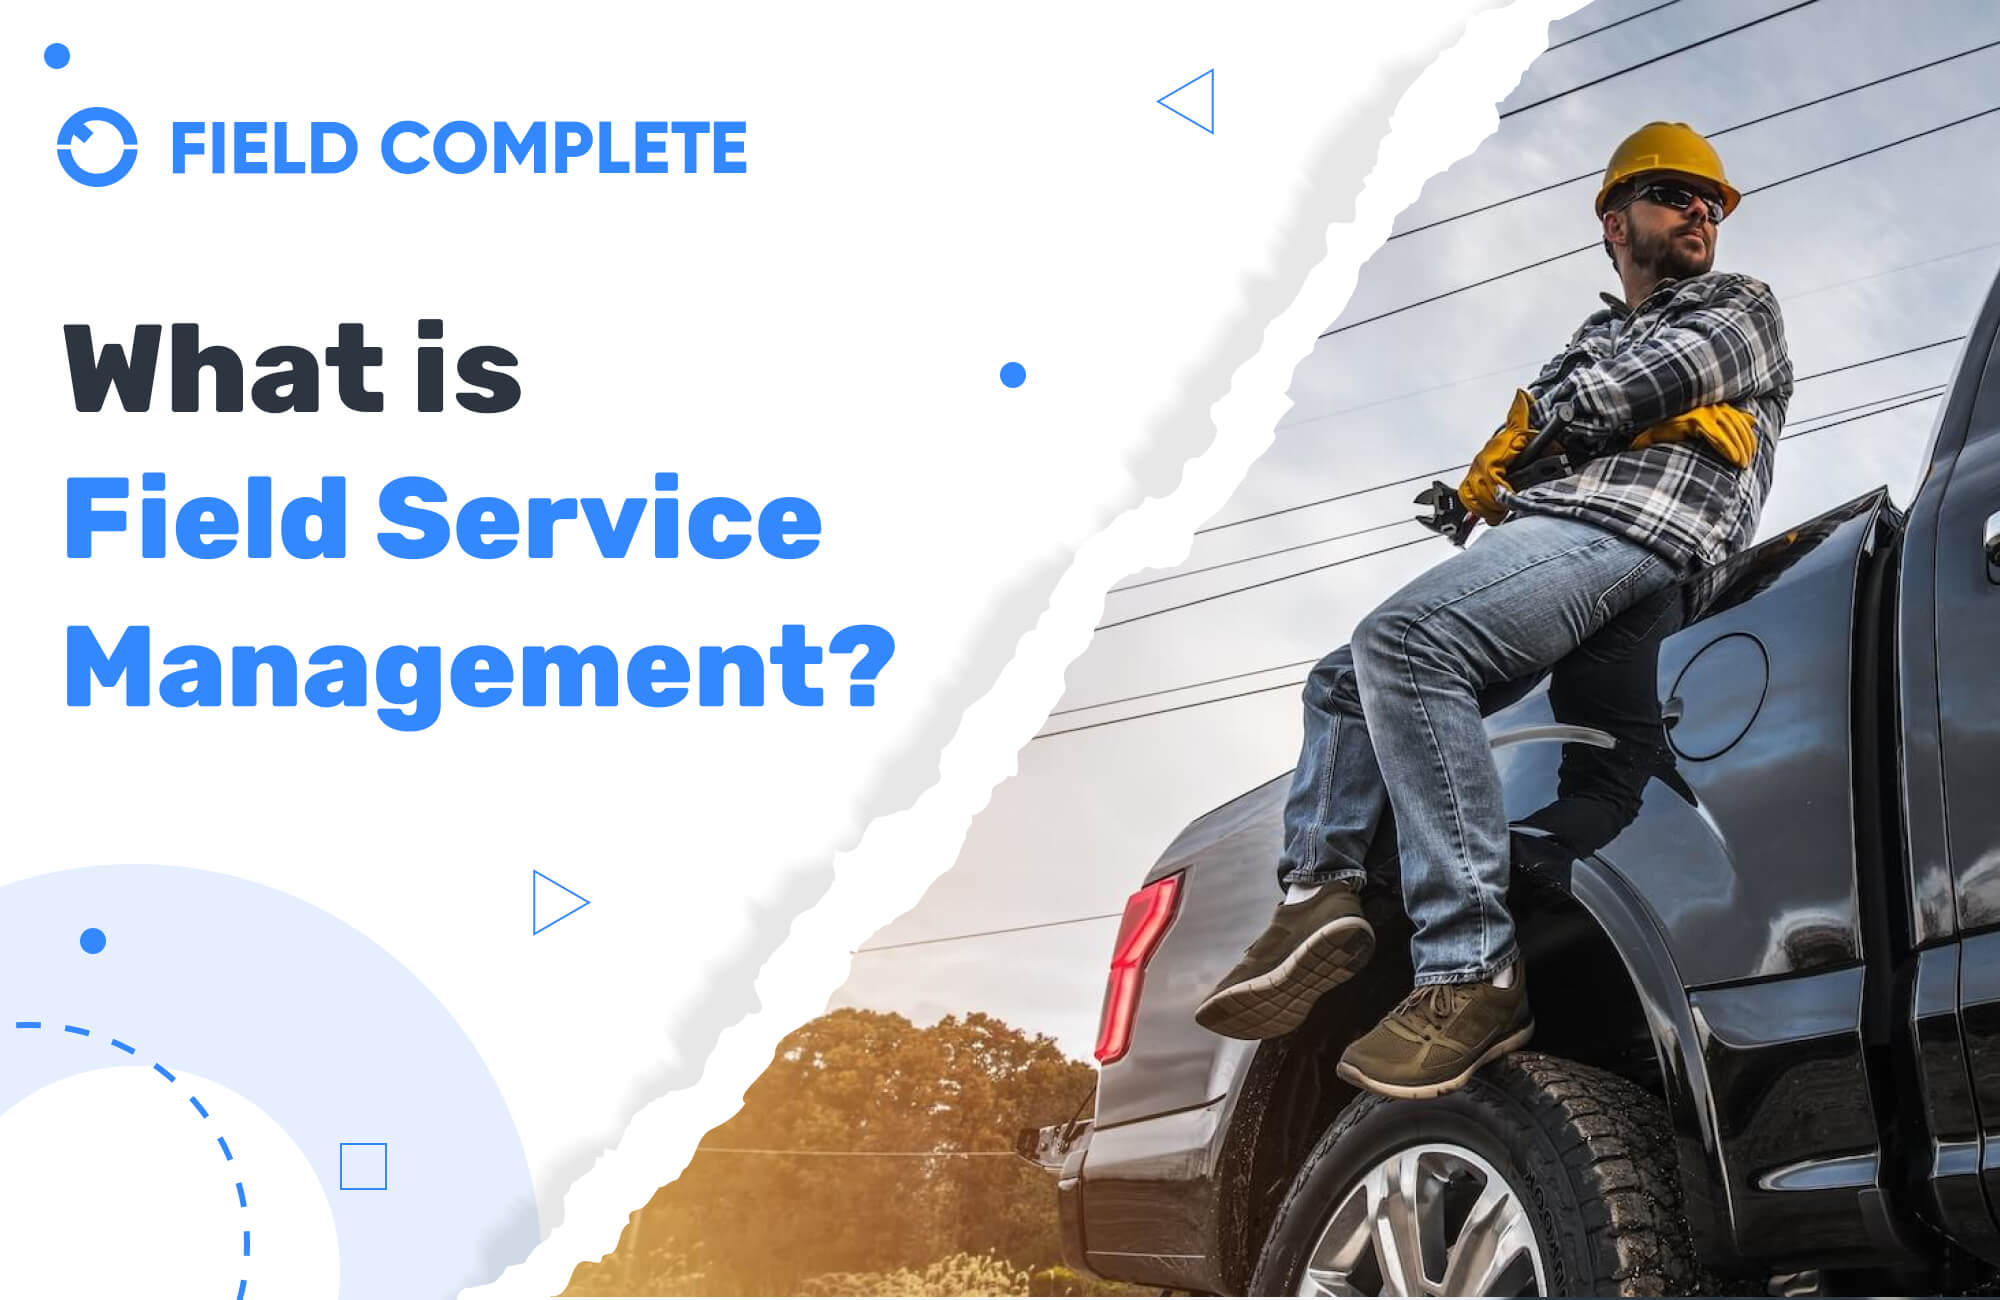 What is Field Service Management?